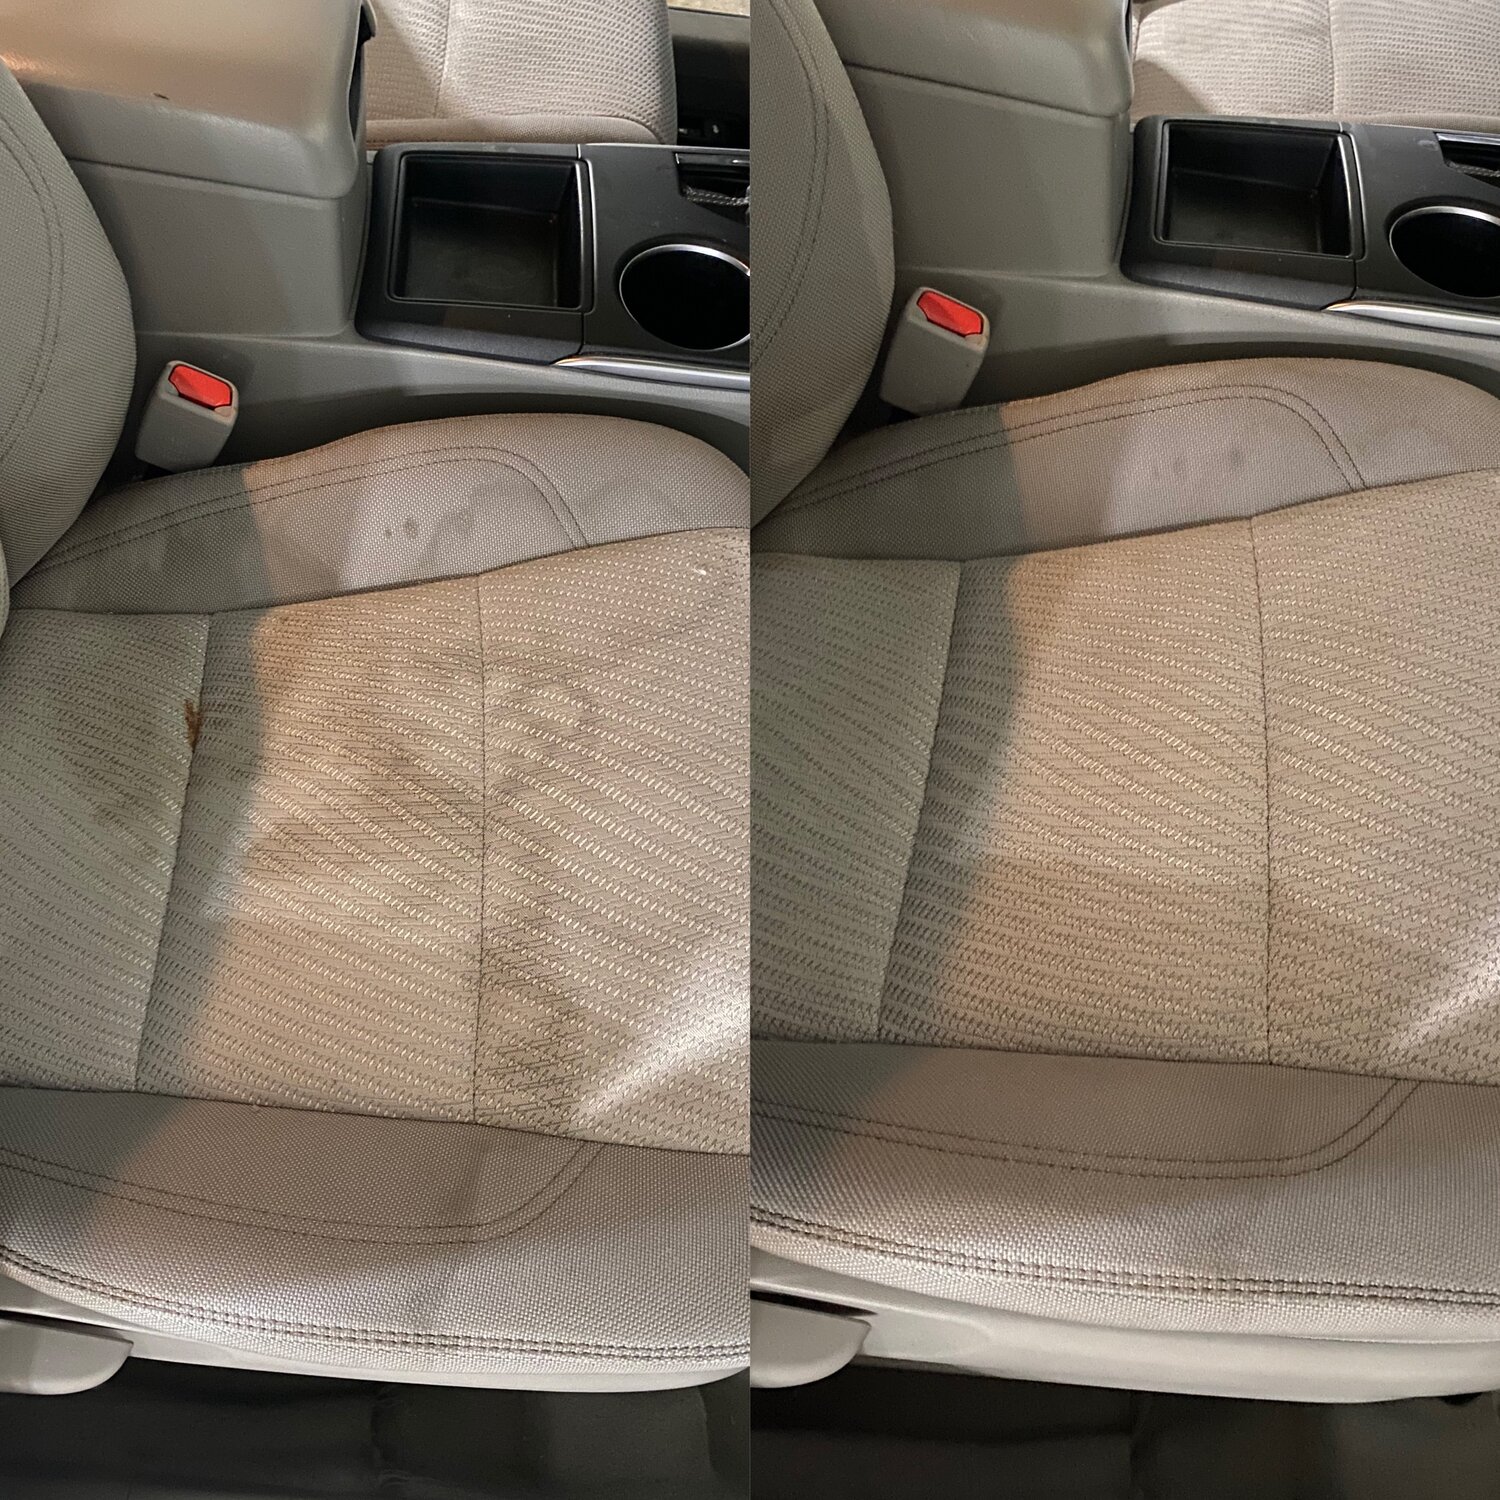 How To Clean Car Seats & Interior